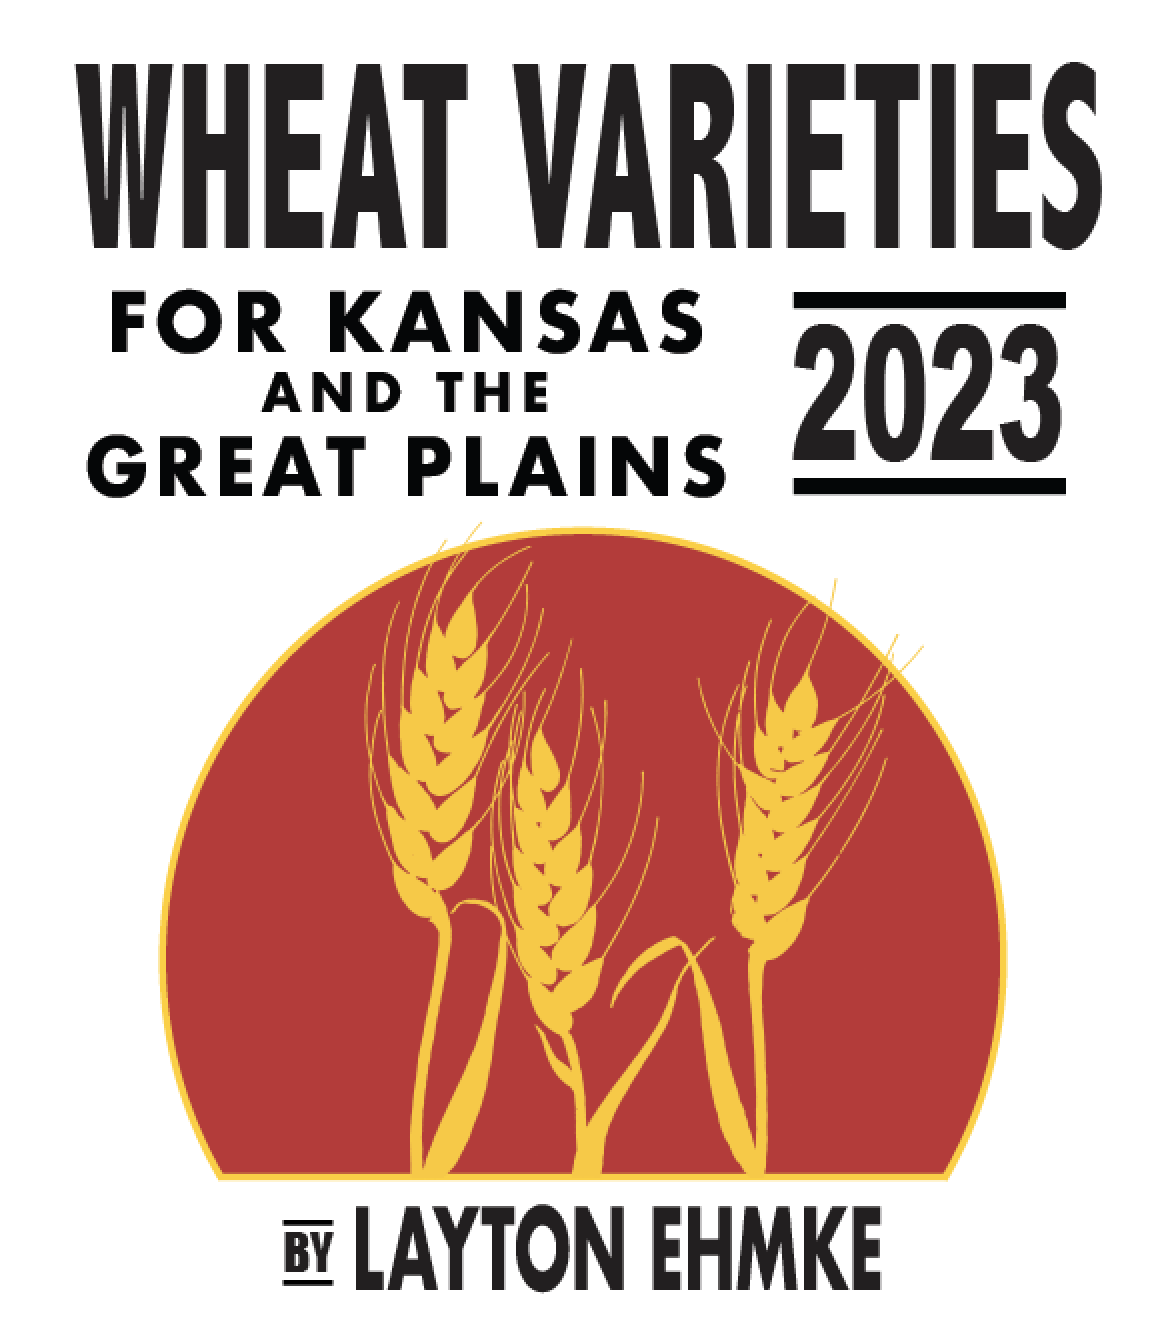 2023 Wheat Varieties for Kansas and the Great Plains Your Best Choices